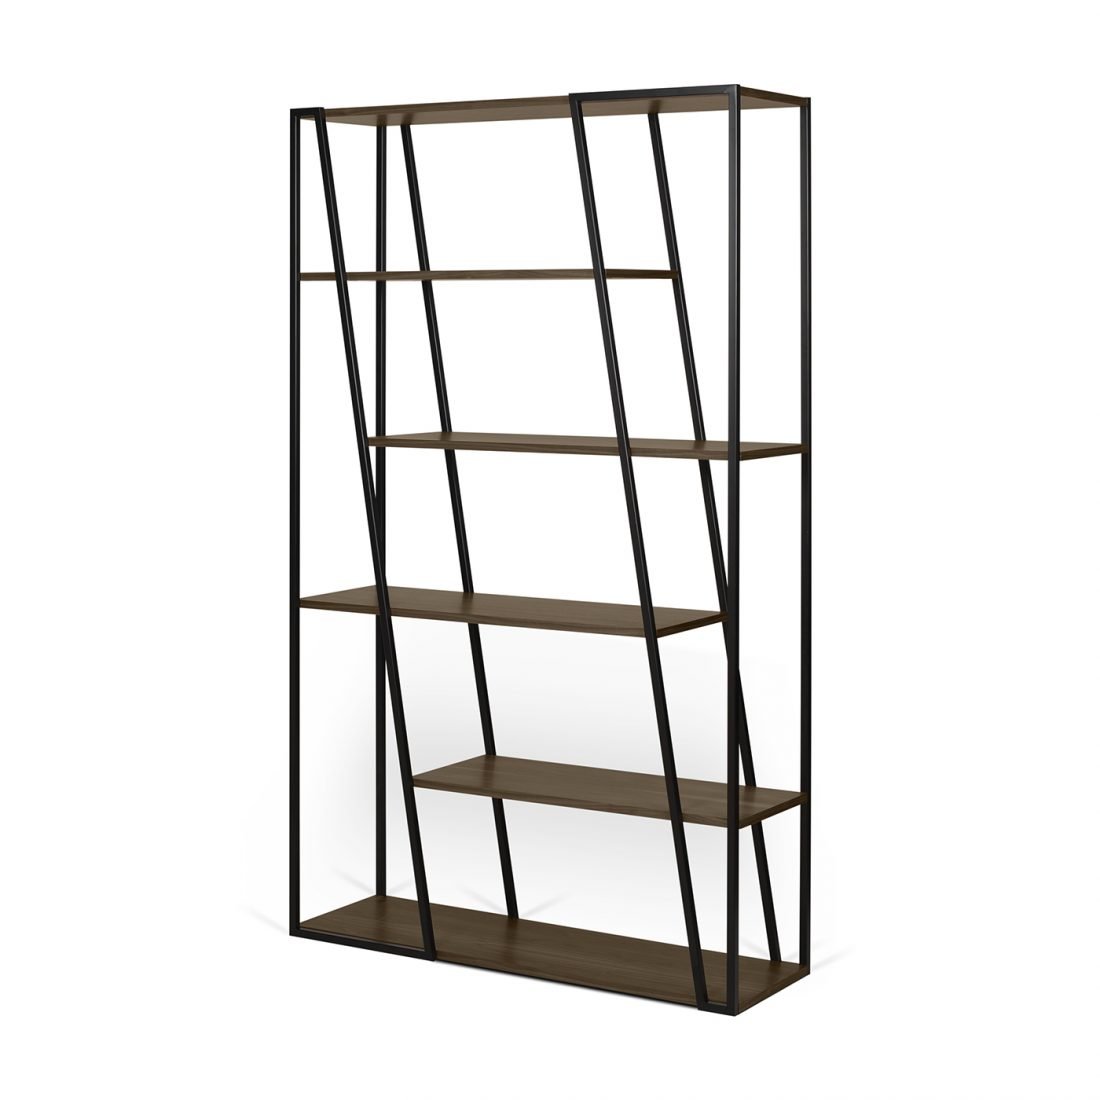 Albi Bookcase from TemaHome, designed by Tiago Sitima